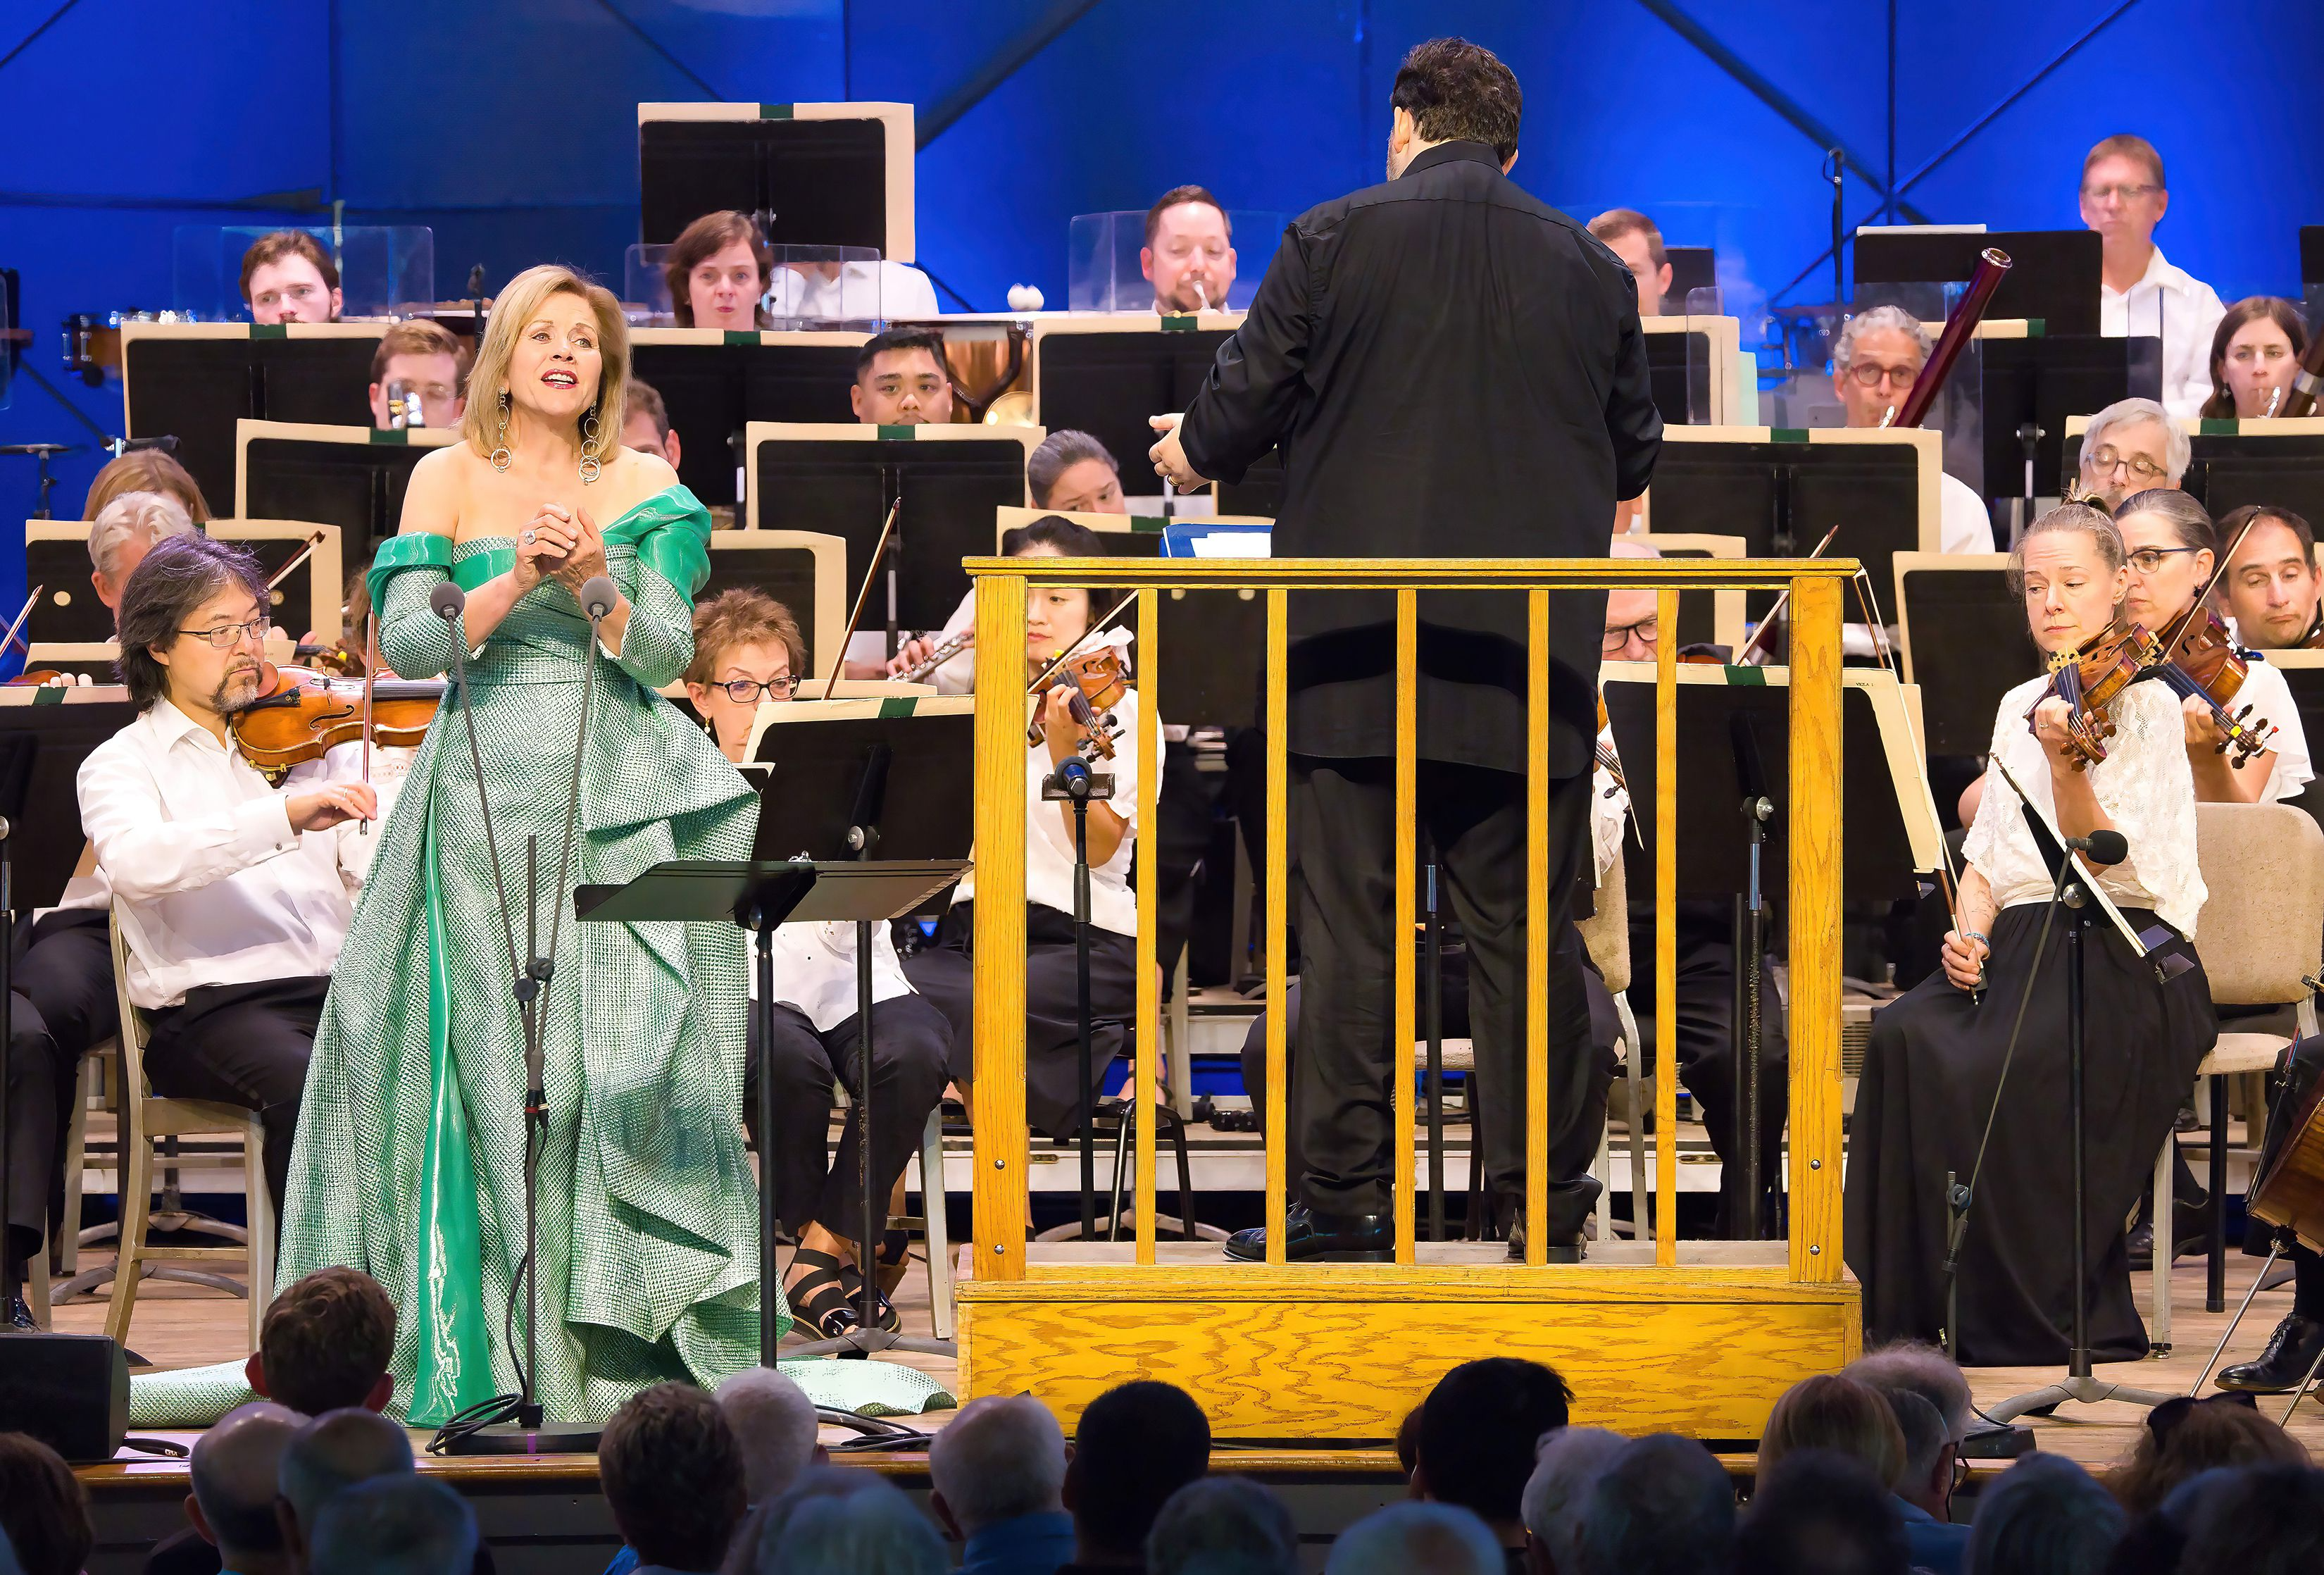 A woman in a teal blue gown sings in front of an orchestra.